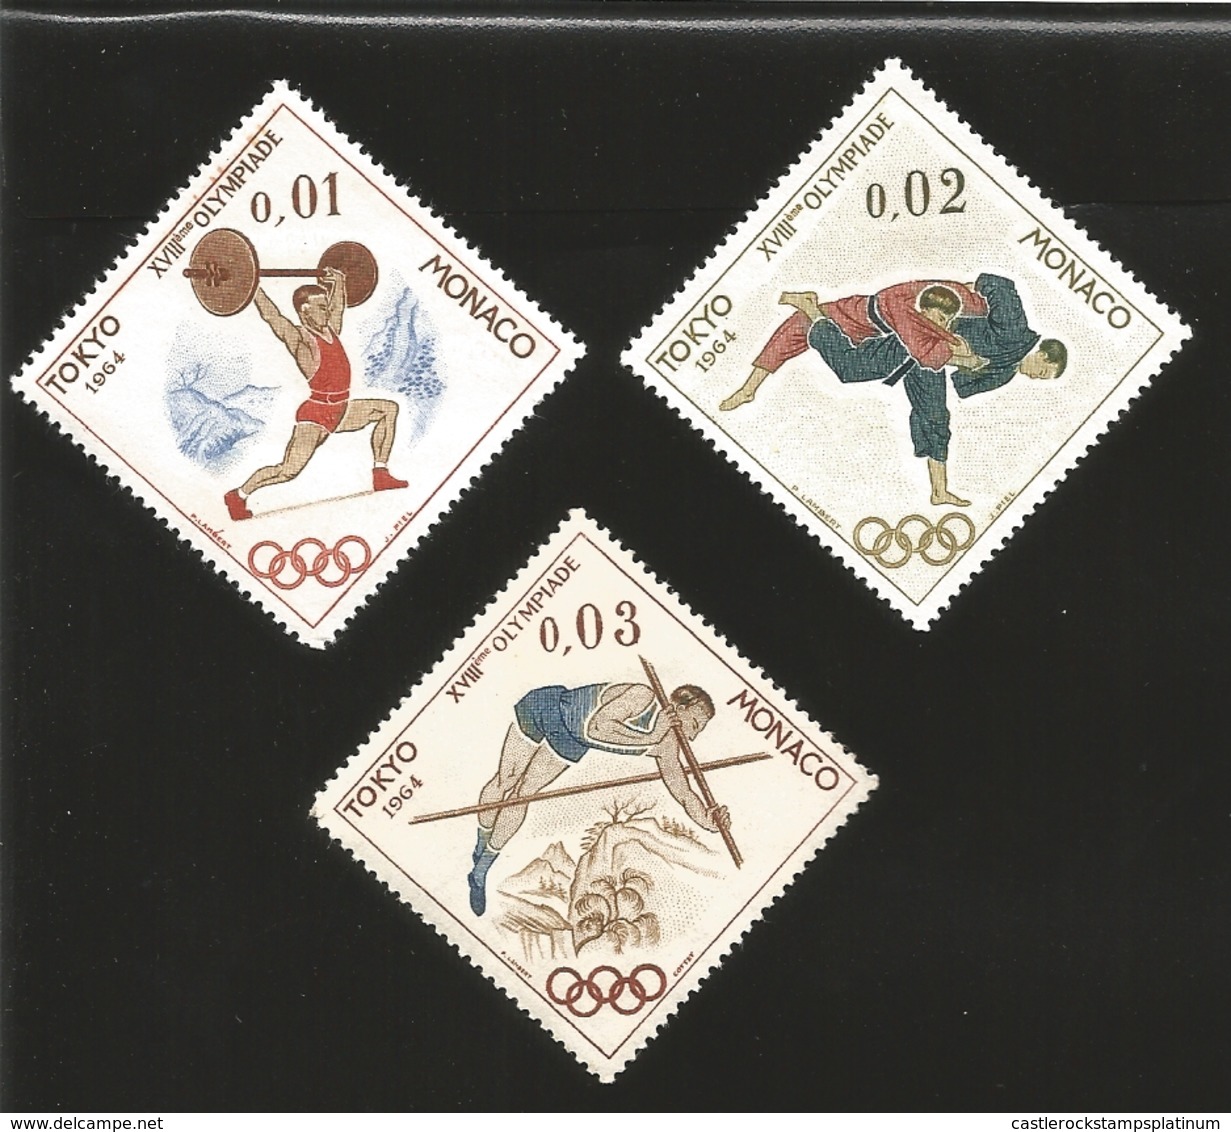 O) 1964 MONACO, OLYMPIC GAMES TOKIO. WEIGHT LIFTER-JUDO-POLET VAULT-SPORTS, MNH - Unused Stamps